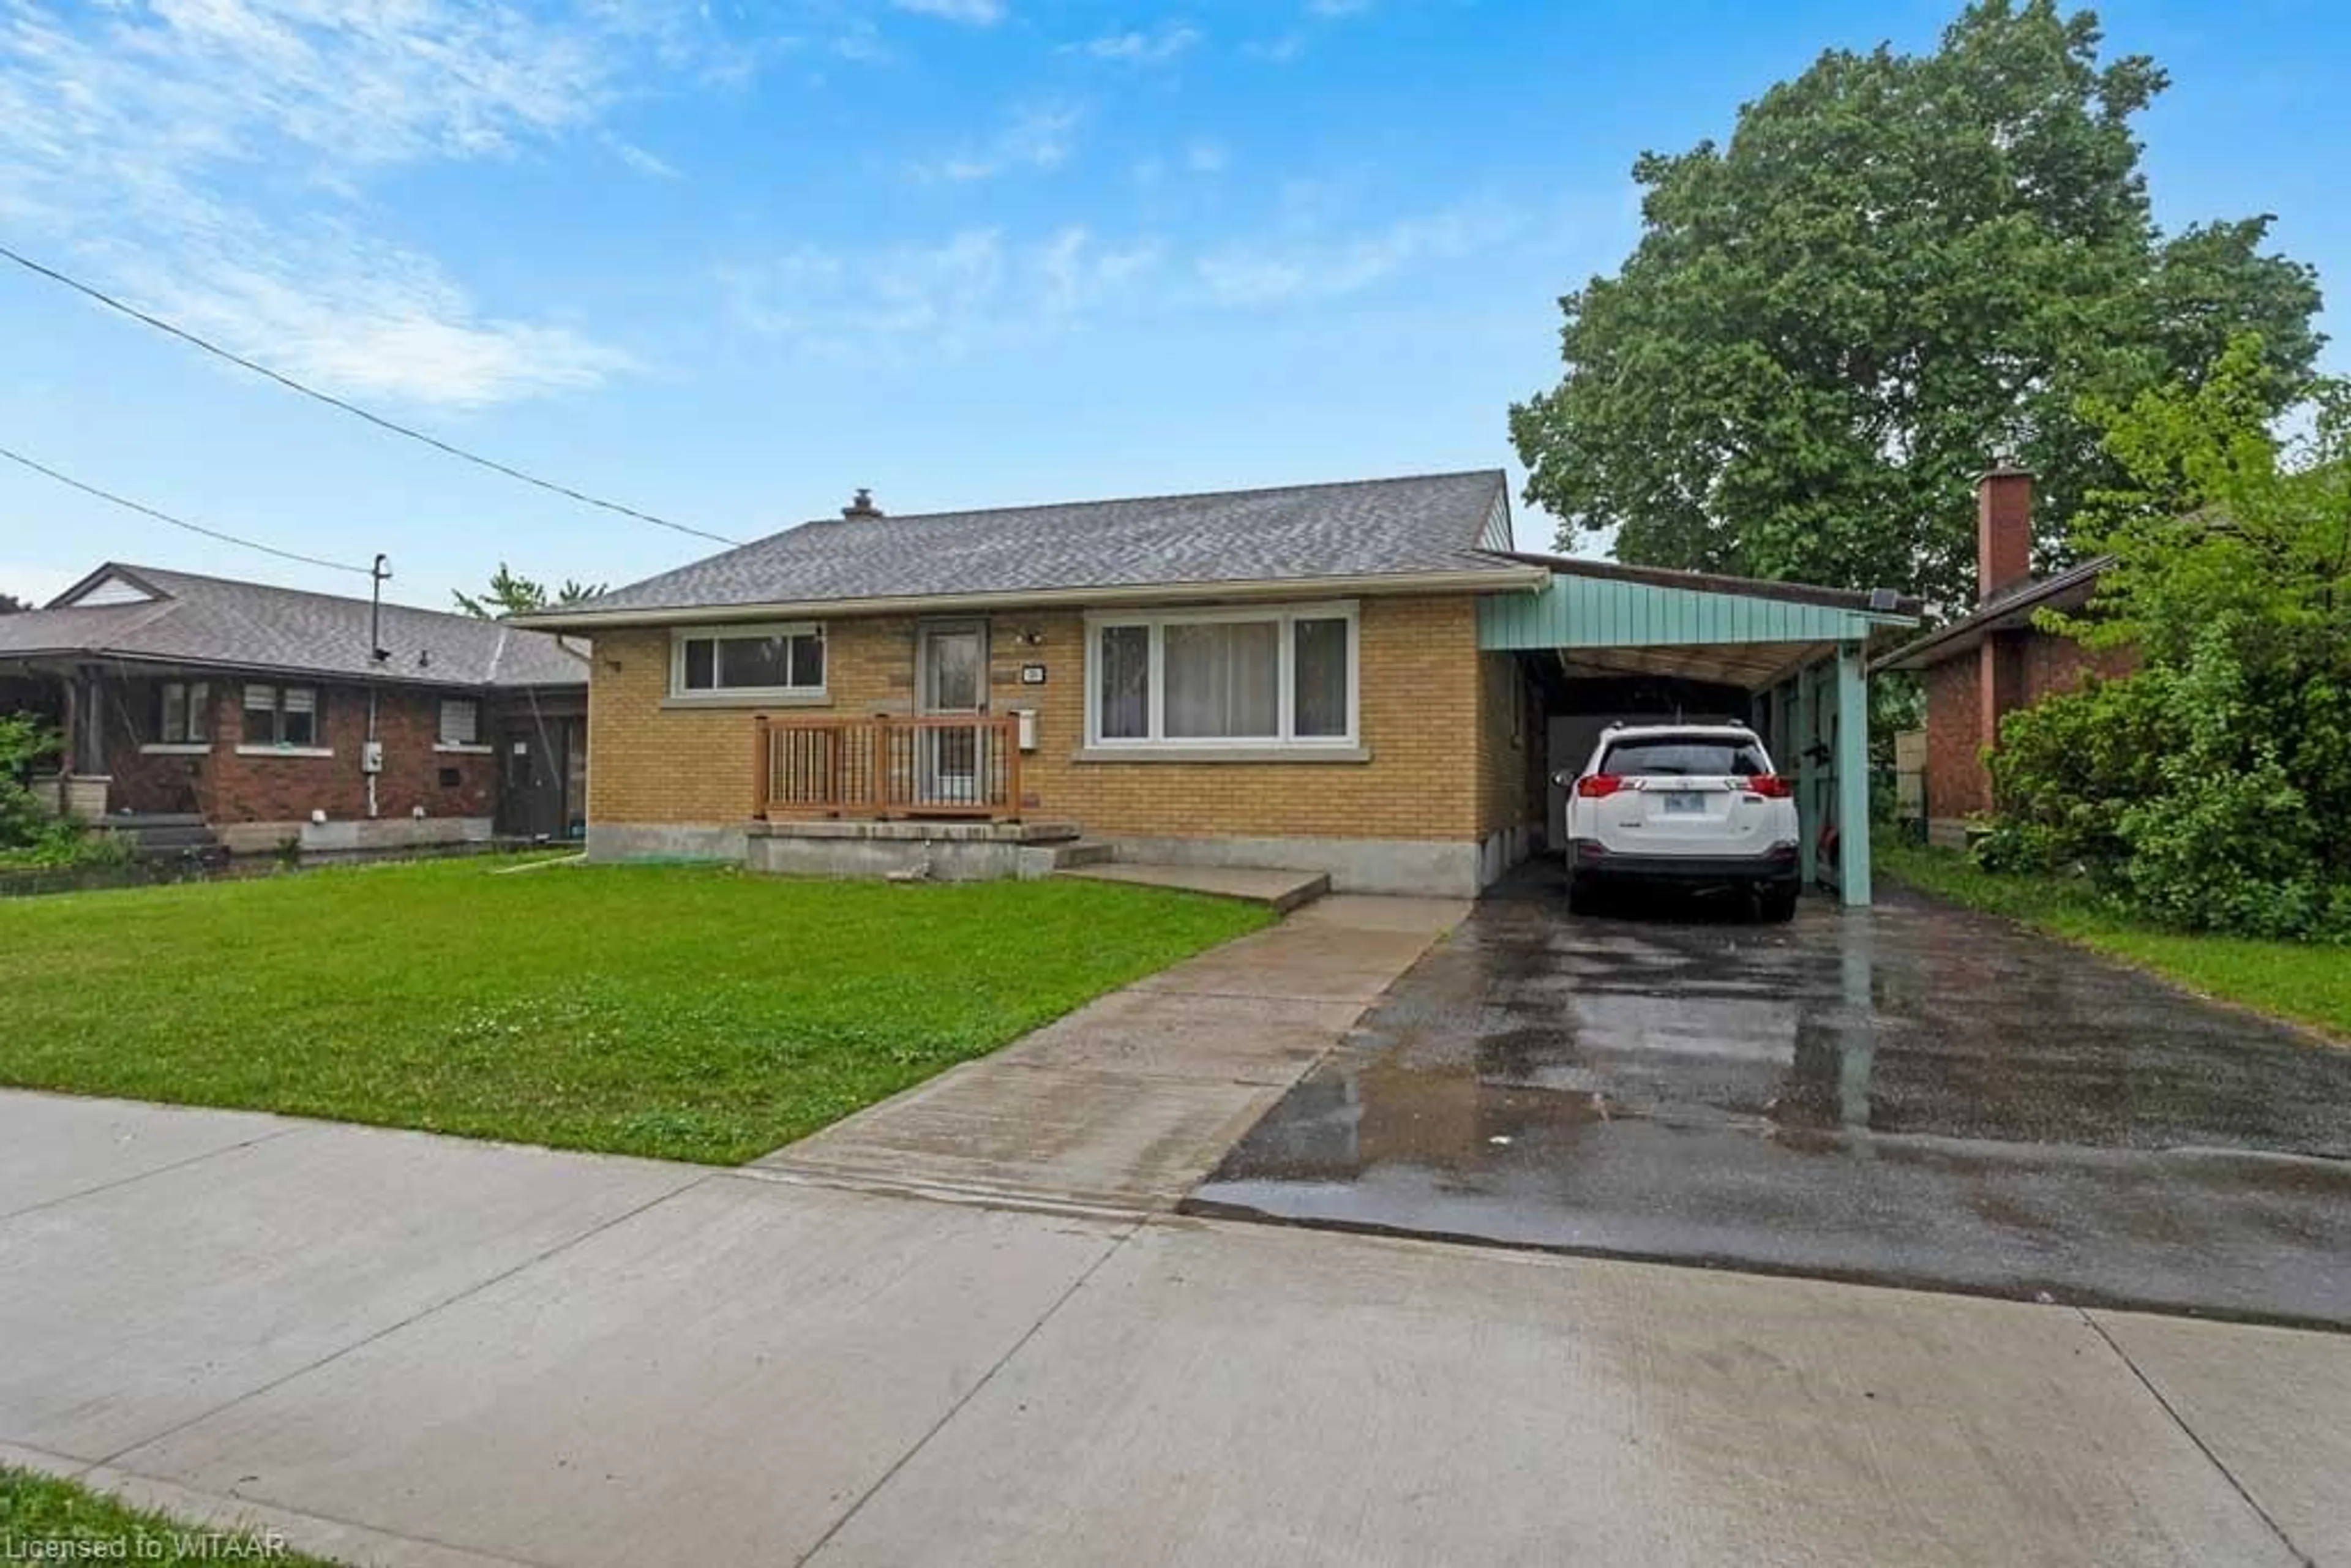 Frontside or backside of a home for 30 Traynor Ave, Kitchener Ontario N2C 1V9